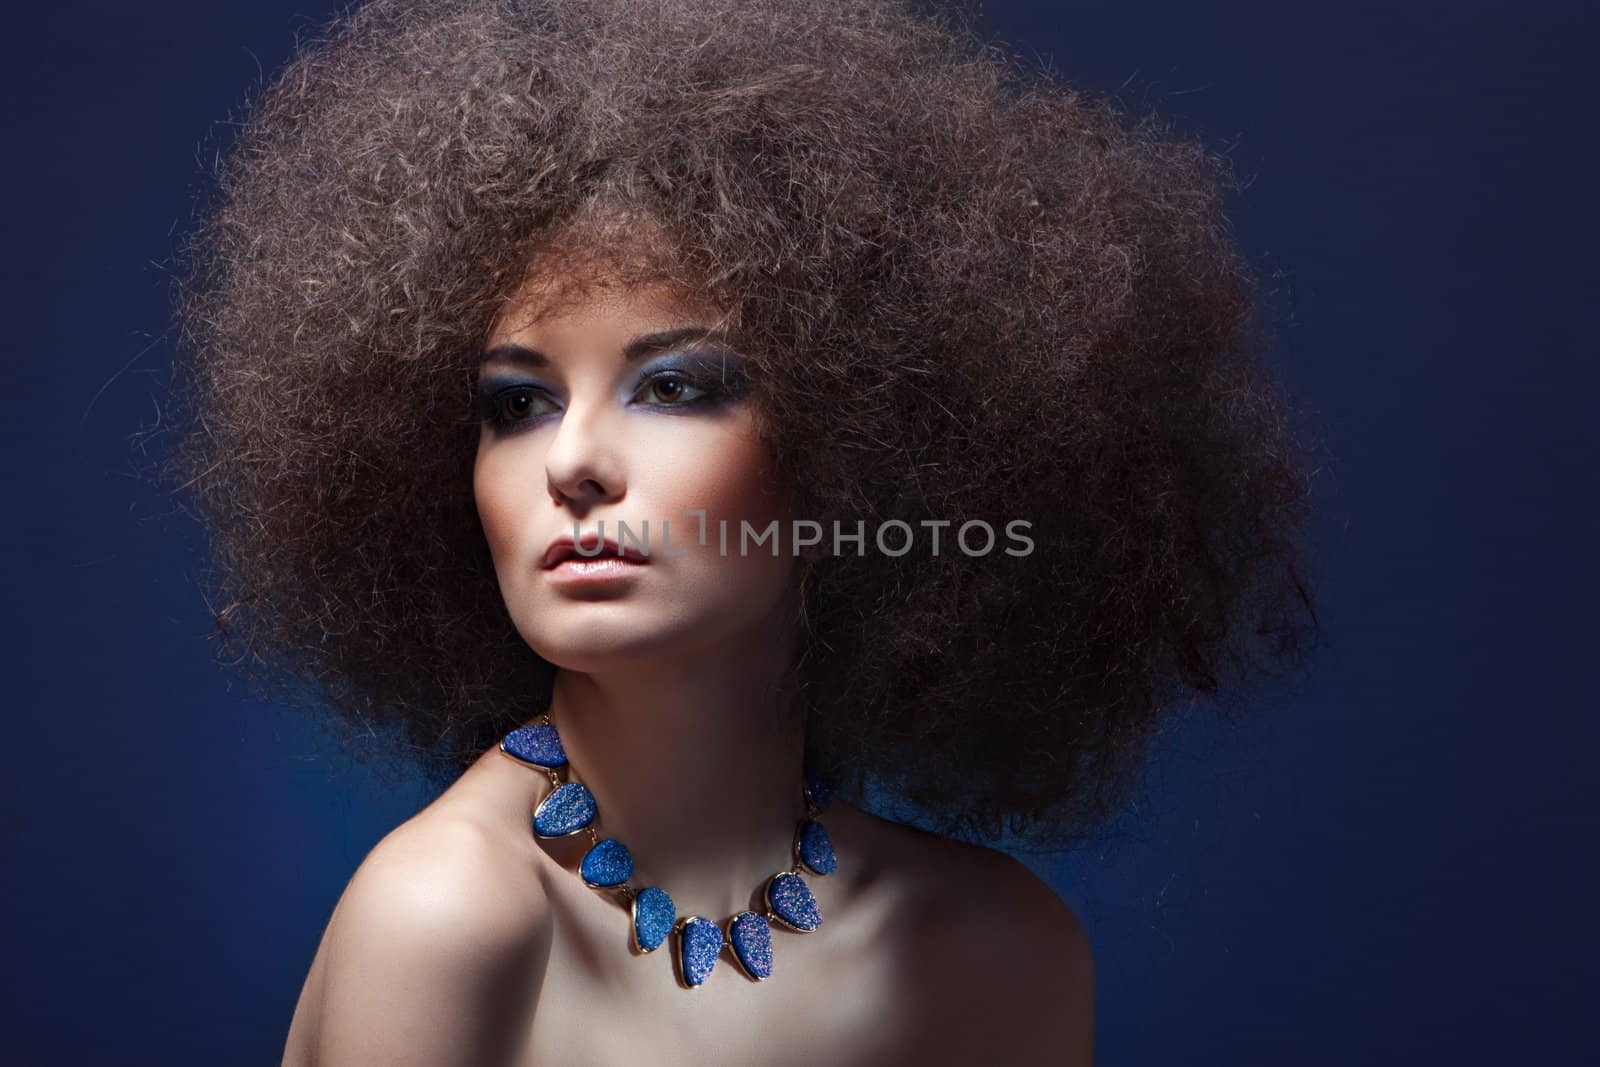 beauty woman with curly hair and blue make-up by nigerfoxy